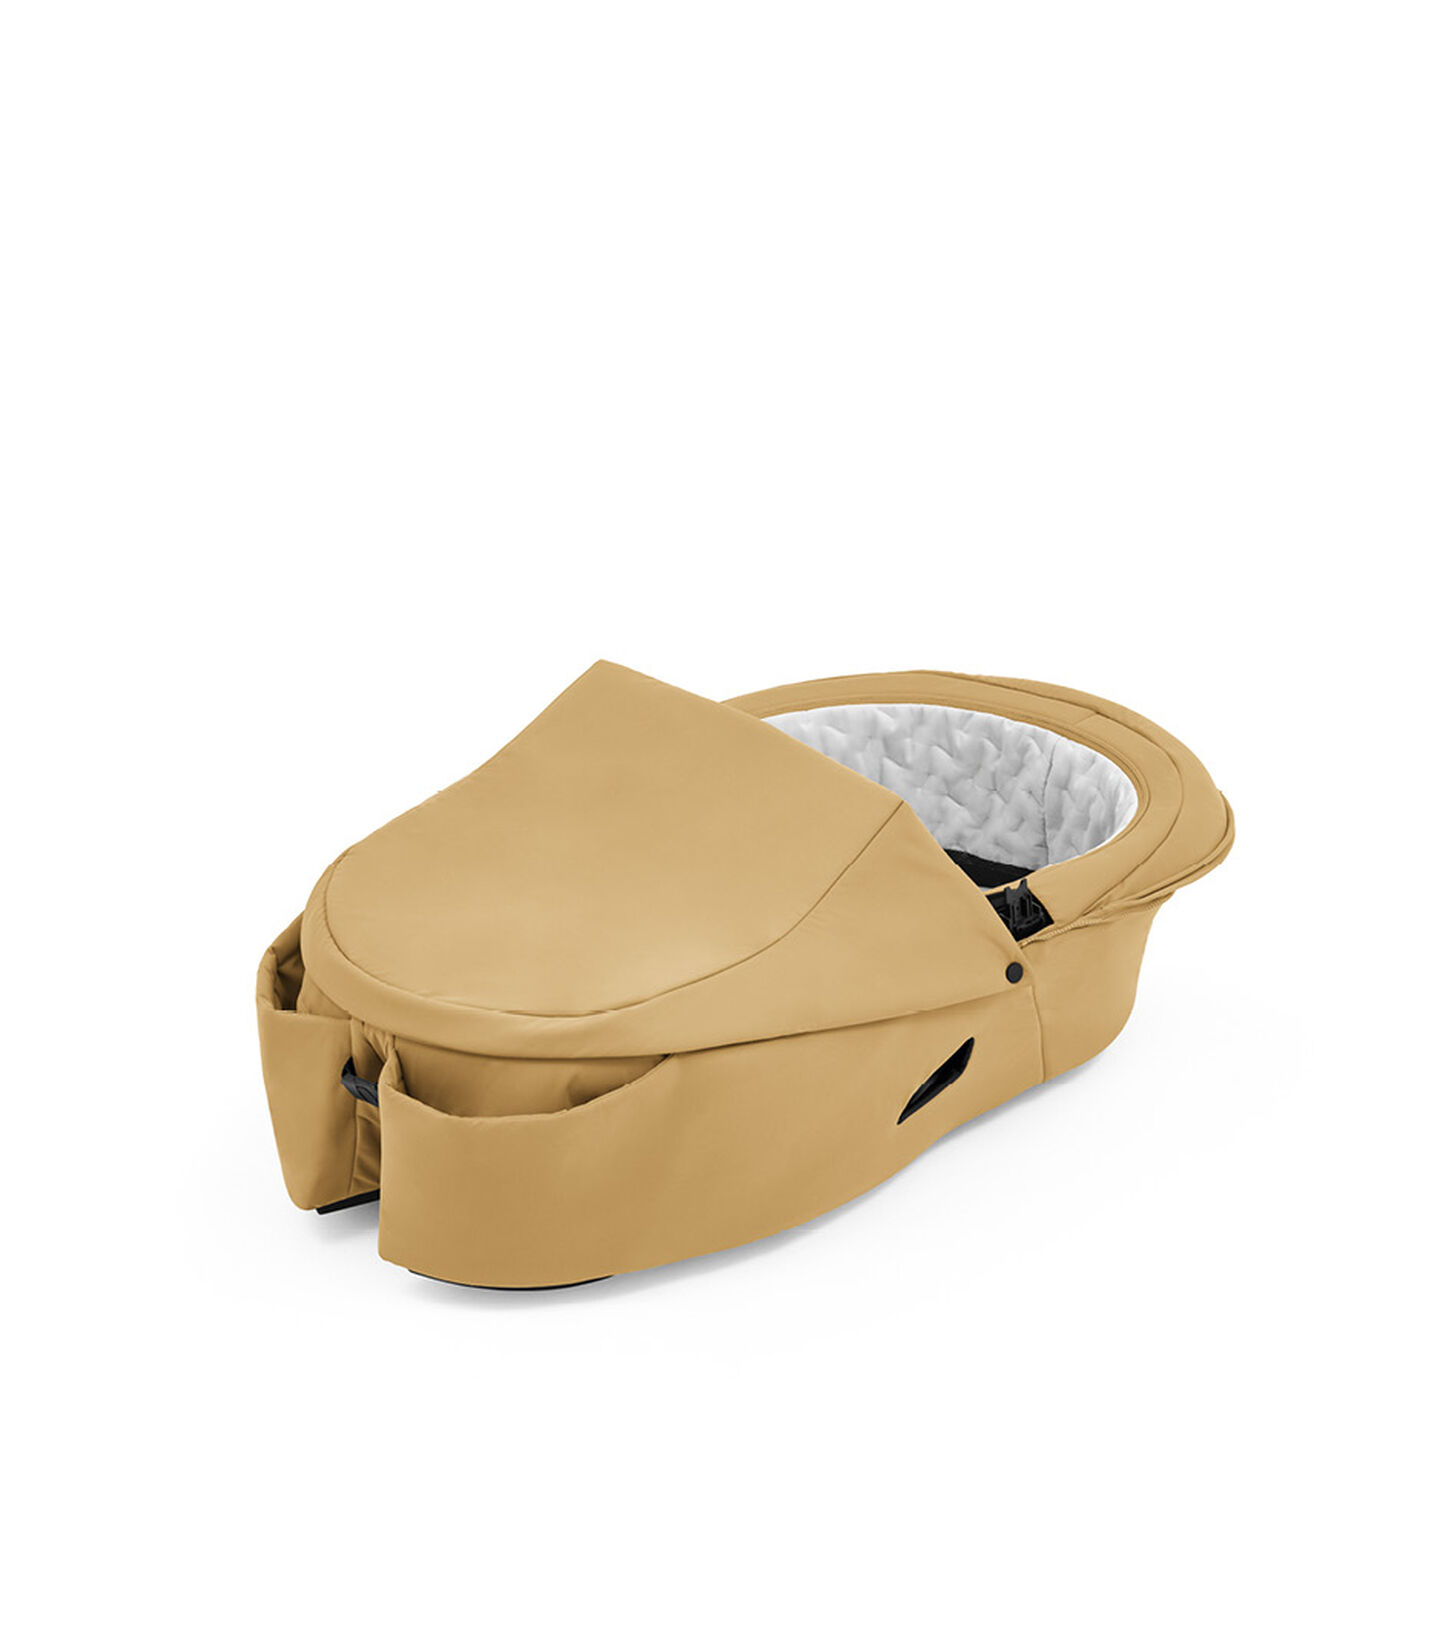 Stokke® Xplory® X liggedel Golden Yellow, Golden Yellow, mainview view 1